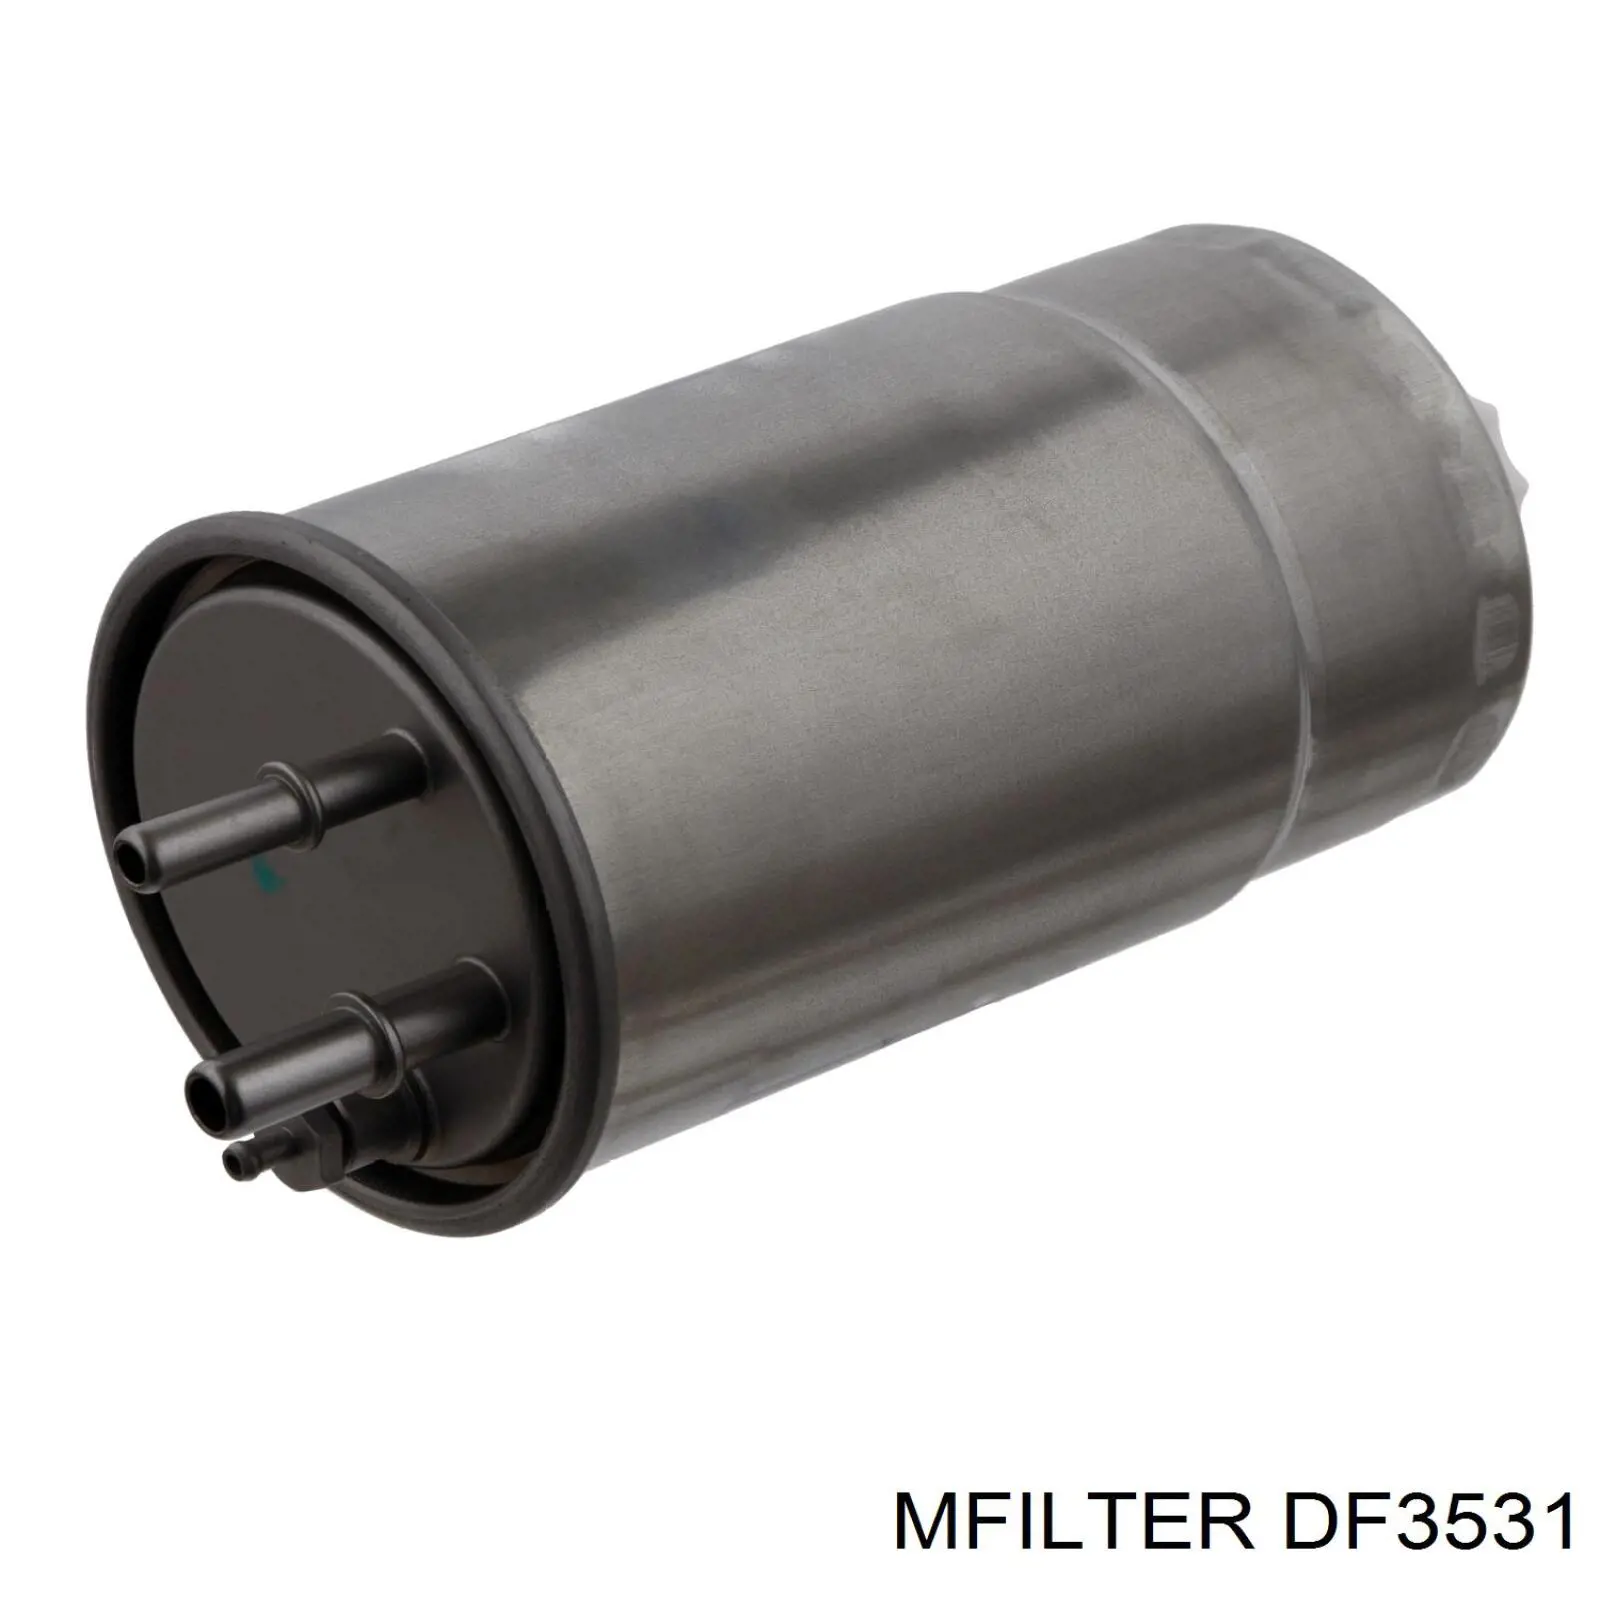 DF3531 Mfilter filtro combustible